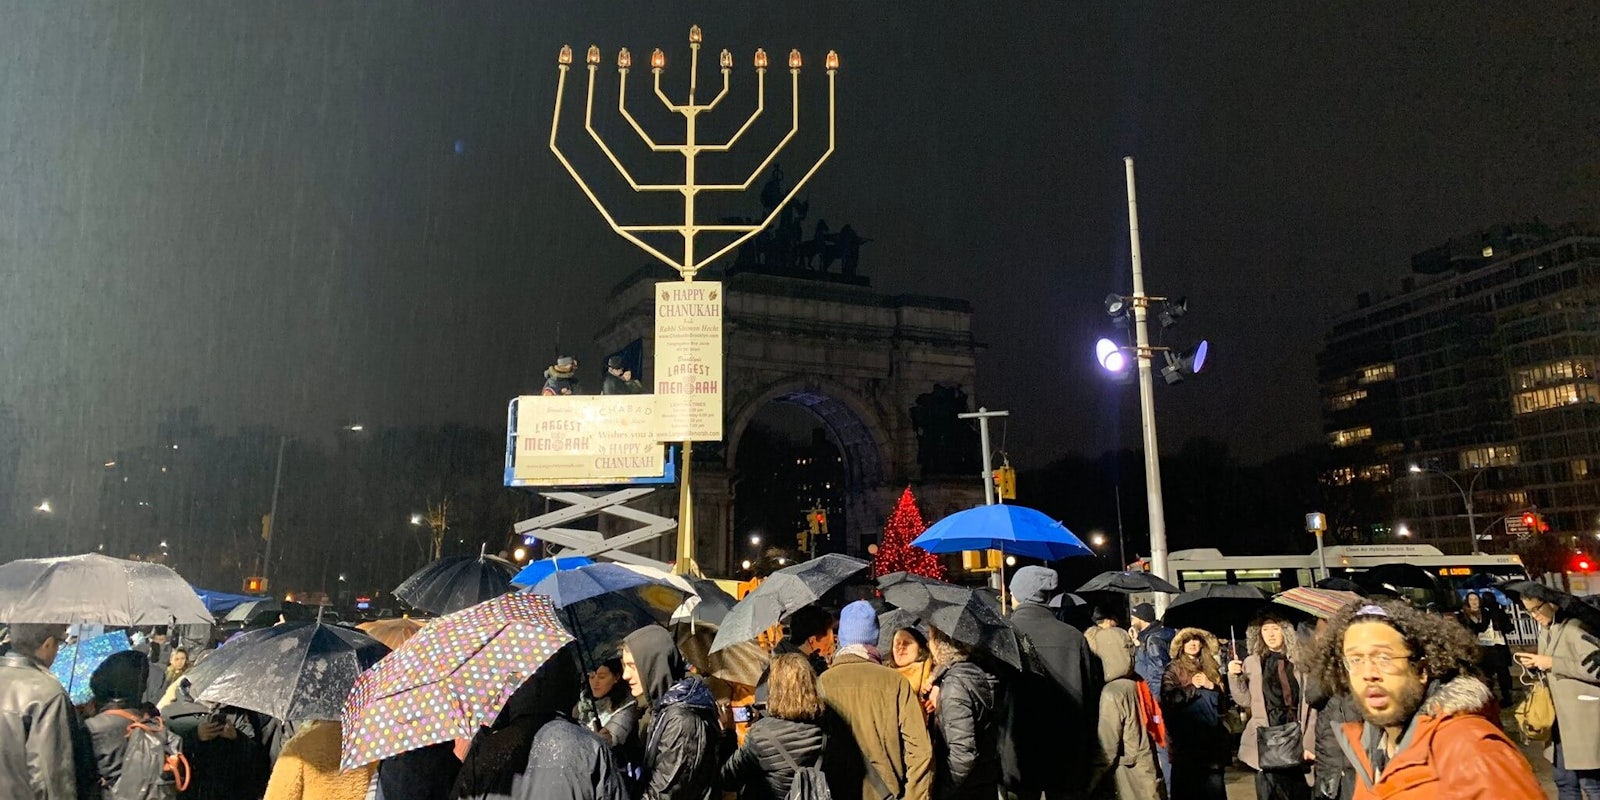 Photos showed members from the community braving the rain to sing and dance around the Menorah